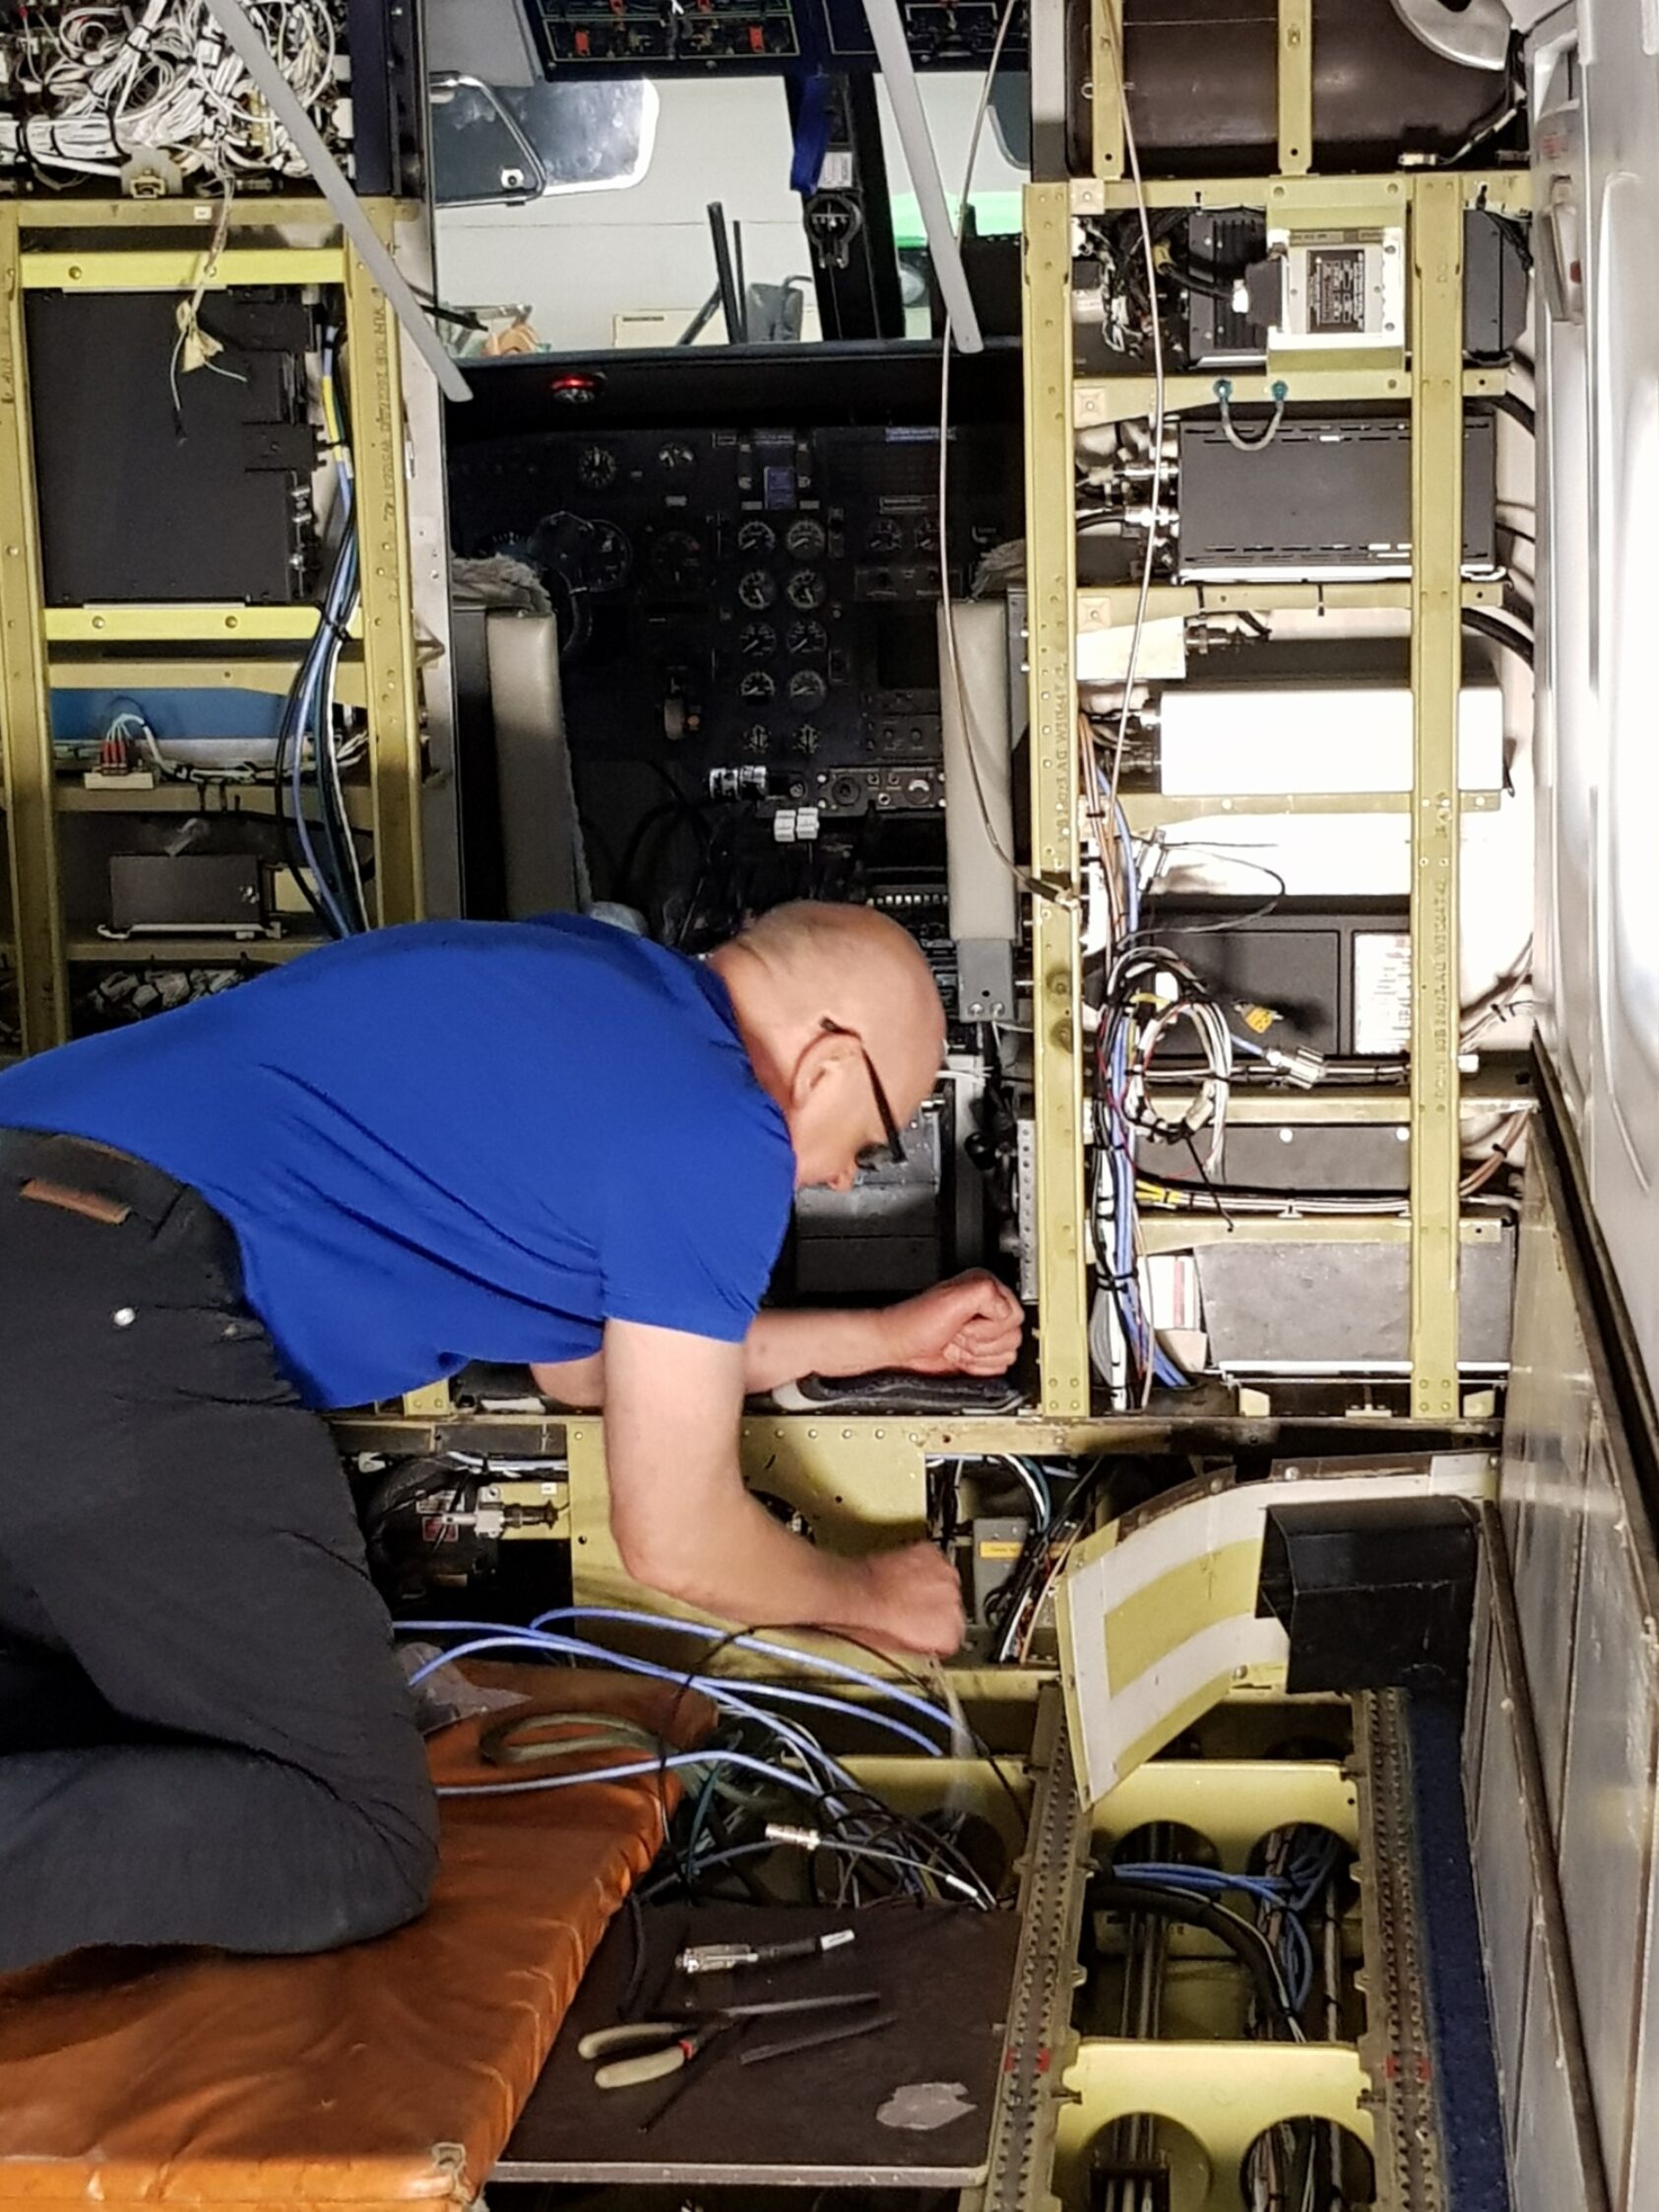 Rannveig H. Stiberg., The cabling between the control unit and the remote-sensing equipment is checked., 20180614 091022, , 